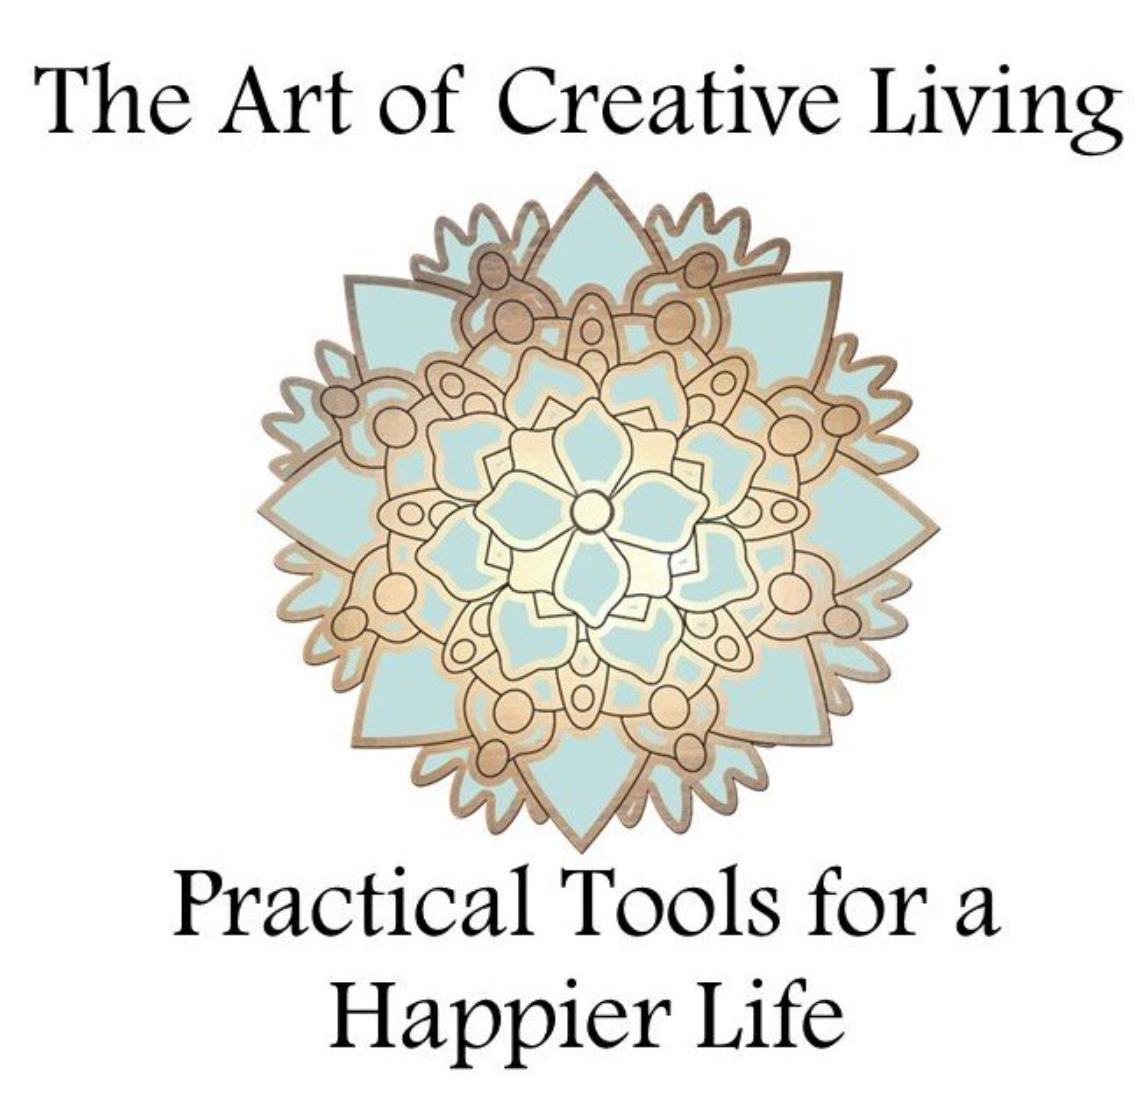 The Art of Creative Living - 8 week series - 5.21-7.16.24  @ 4p or Intro Class 5.21.24 @ 4p